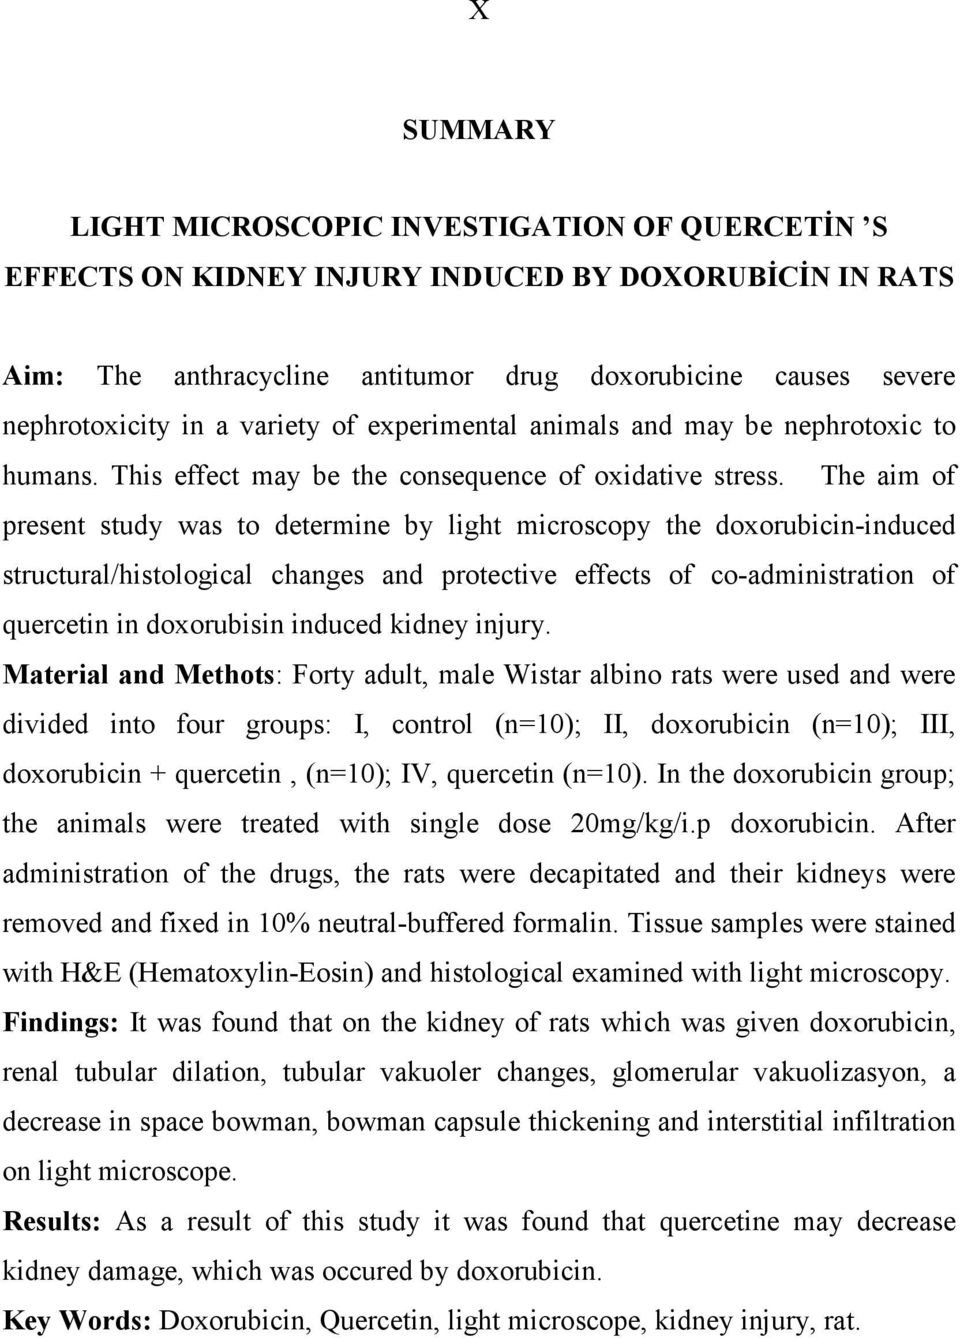 The aim of present study was to determine by light microscopy the doxorubicin-induced structural/histological changes and protective effects of co-administration of quercetin in doxorubisin induced